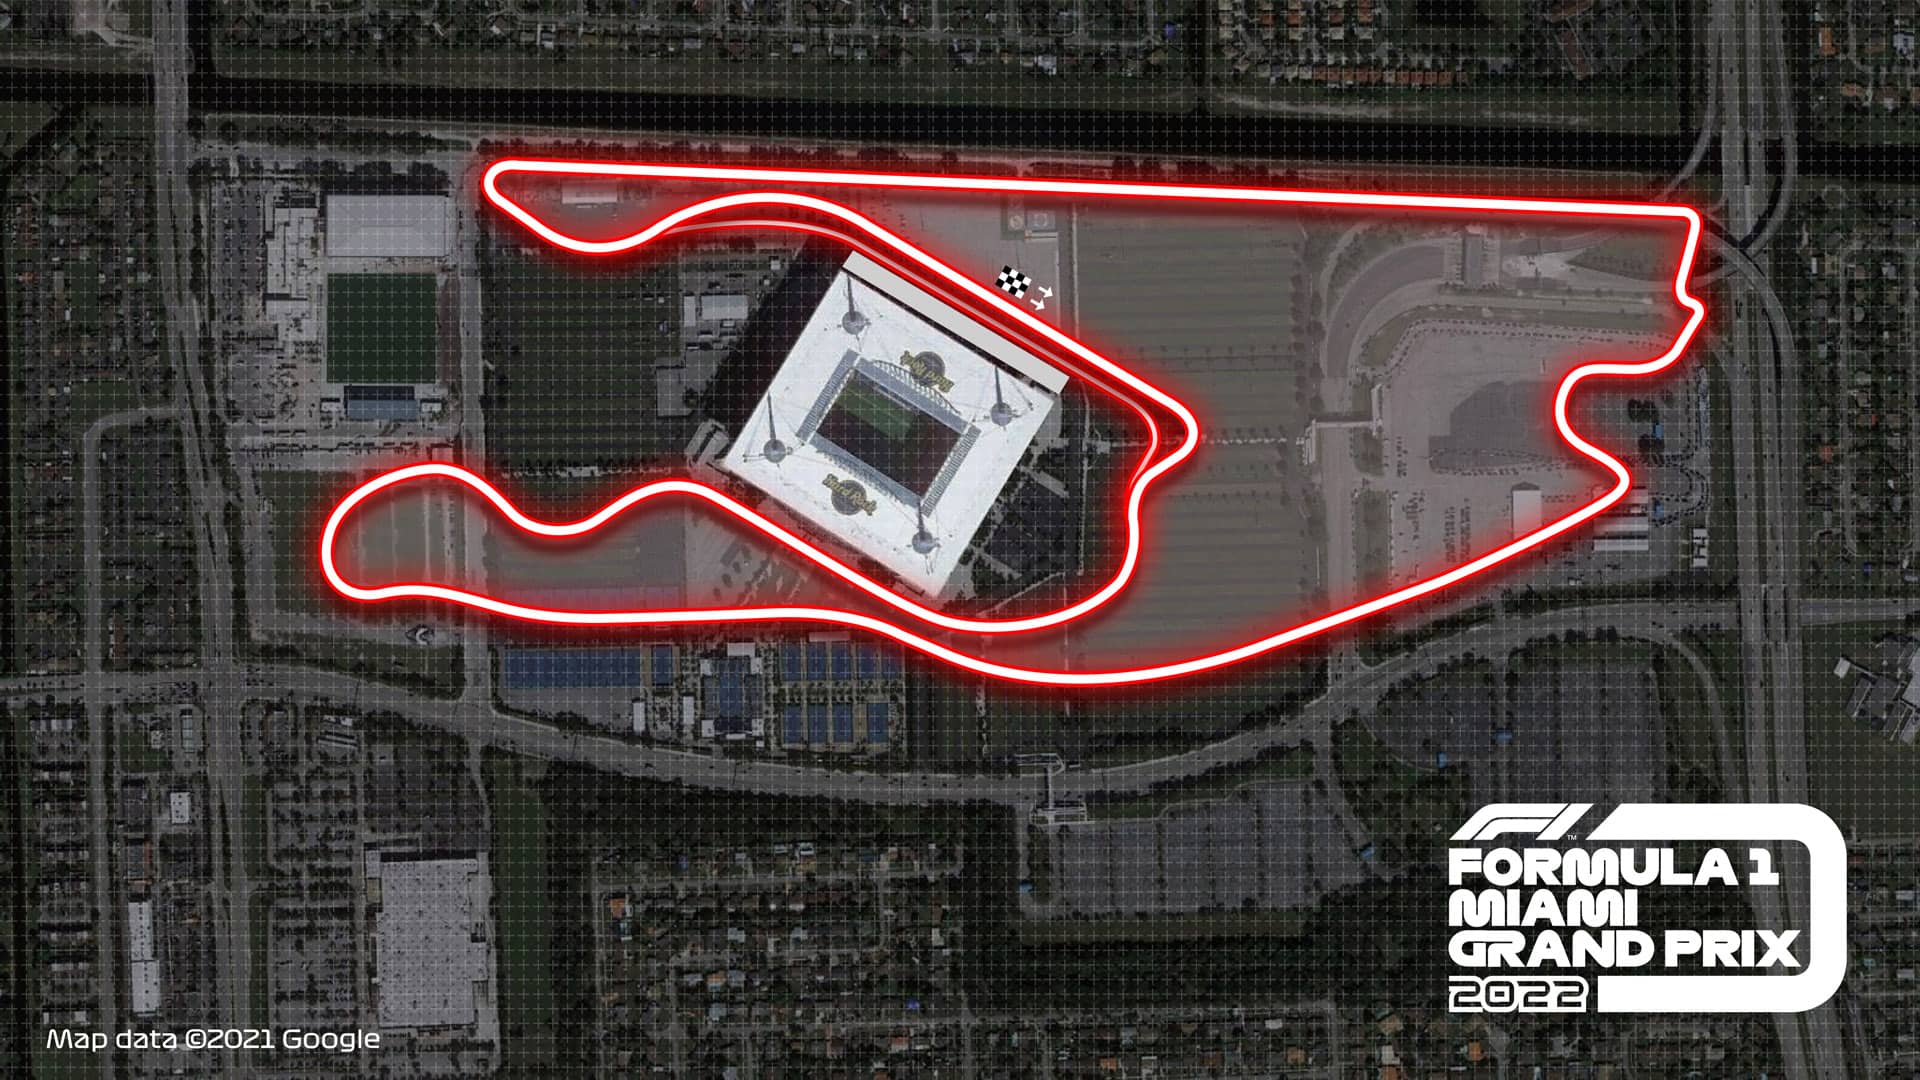 Miami Grand Prix to join F1 calendar in 2022, with exciting new circuit planned Formula 1®